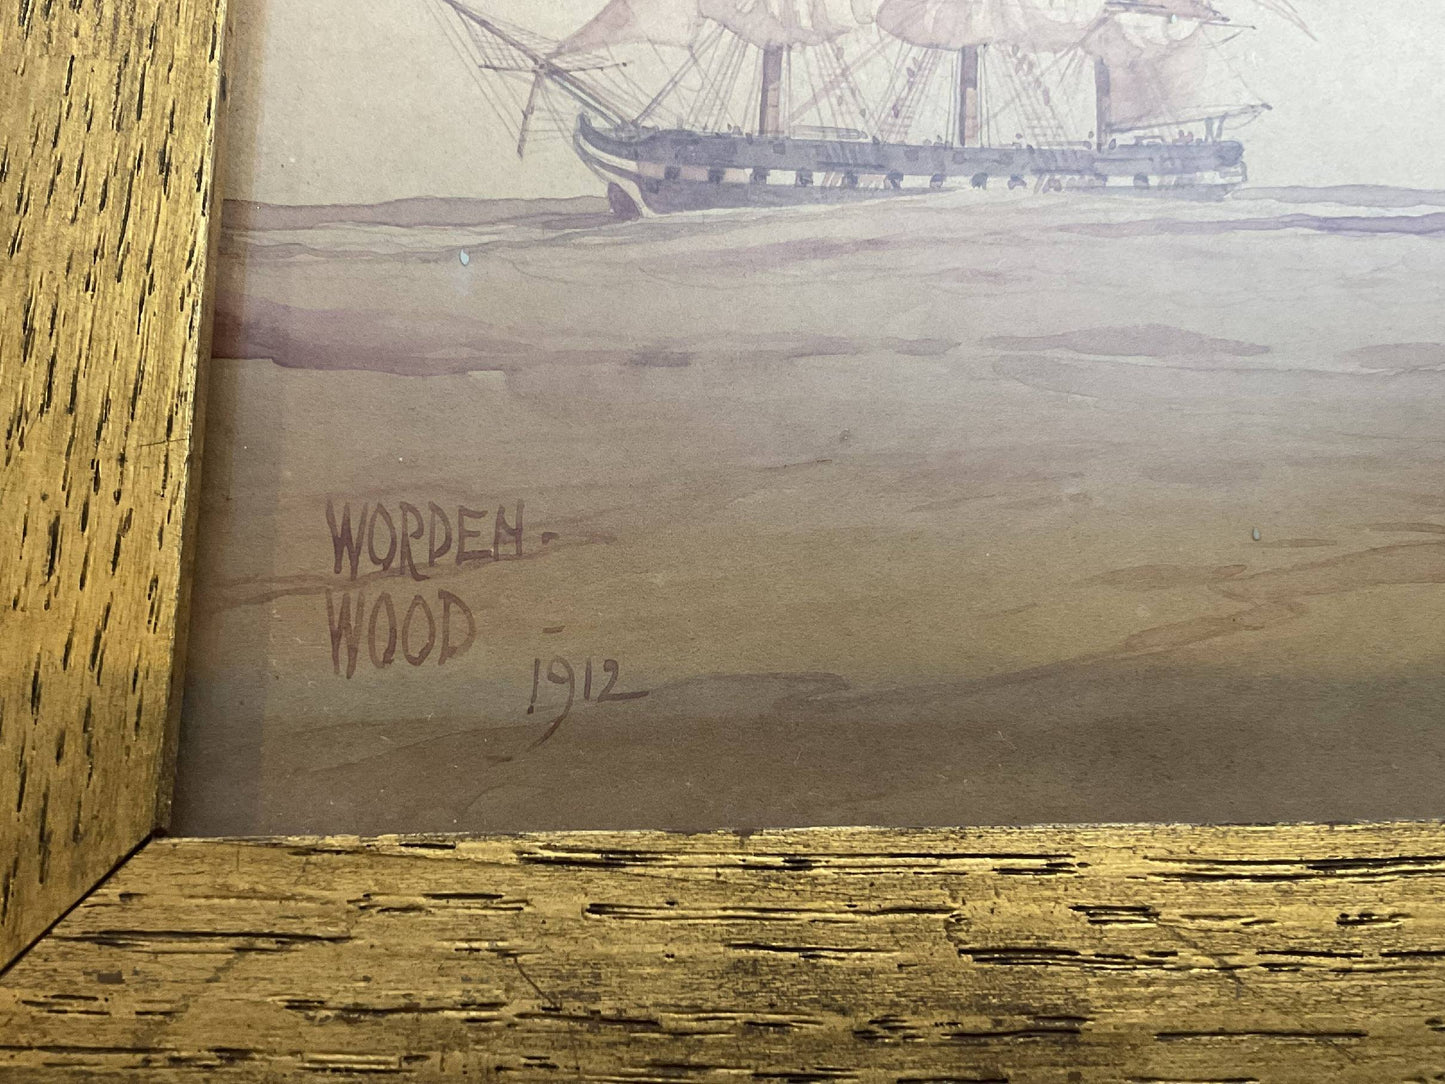 Worden Wood Frigate of the Ship on the Line Ohio